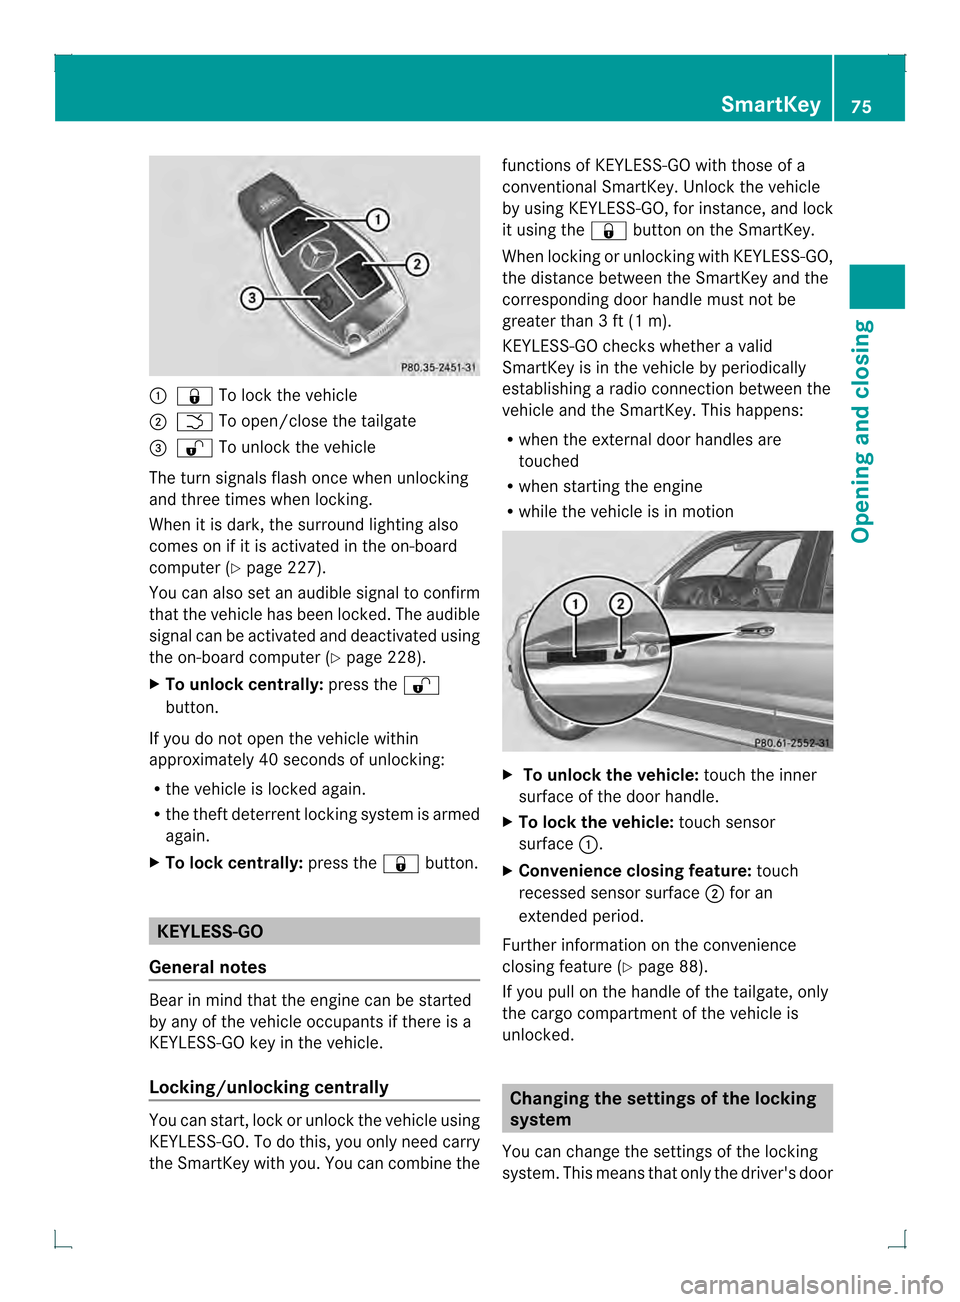 MERCEDES-BENZ GLK-Class 2013 X204 Owners Manual 0002
000B To lock the vehicle
0003 0004 To open/close the tailgate
0021 000C To unlock the vehicle
The turn signals flash once when unlocking
and three times when locking.
When it is dark, the surroun